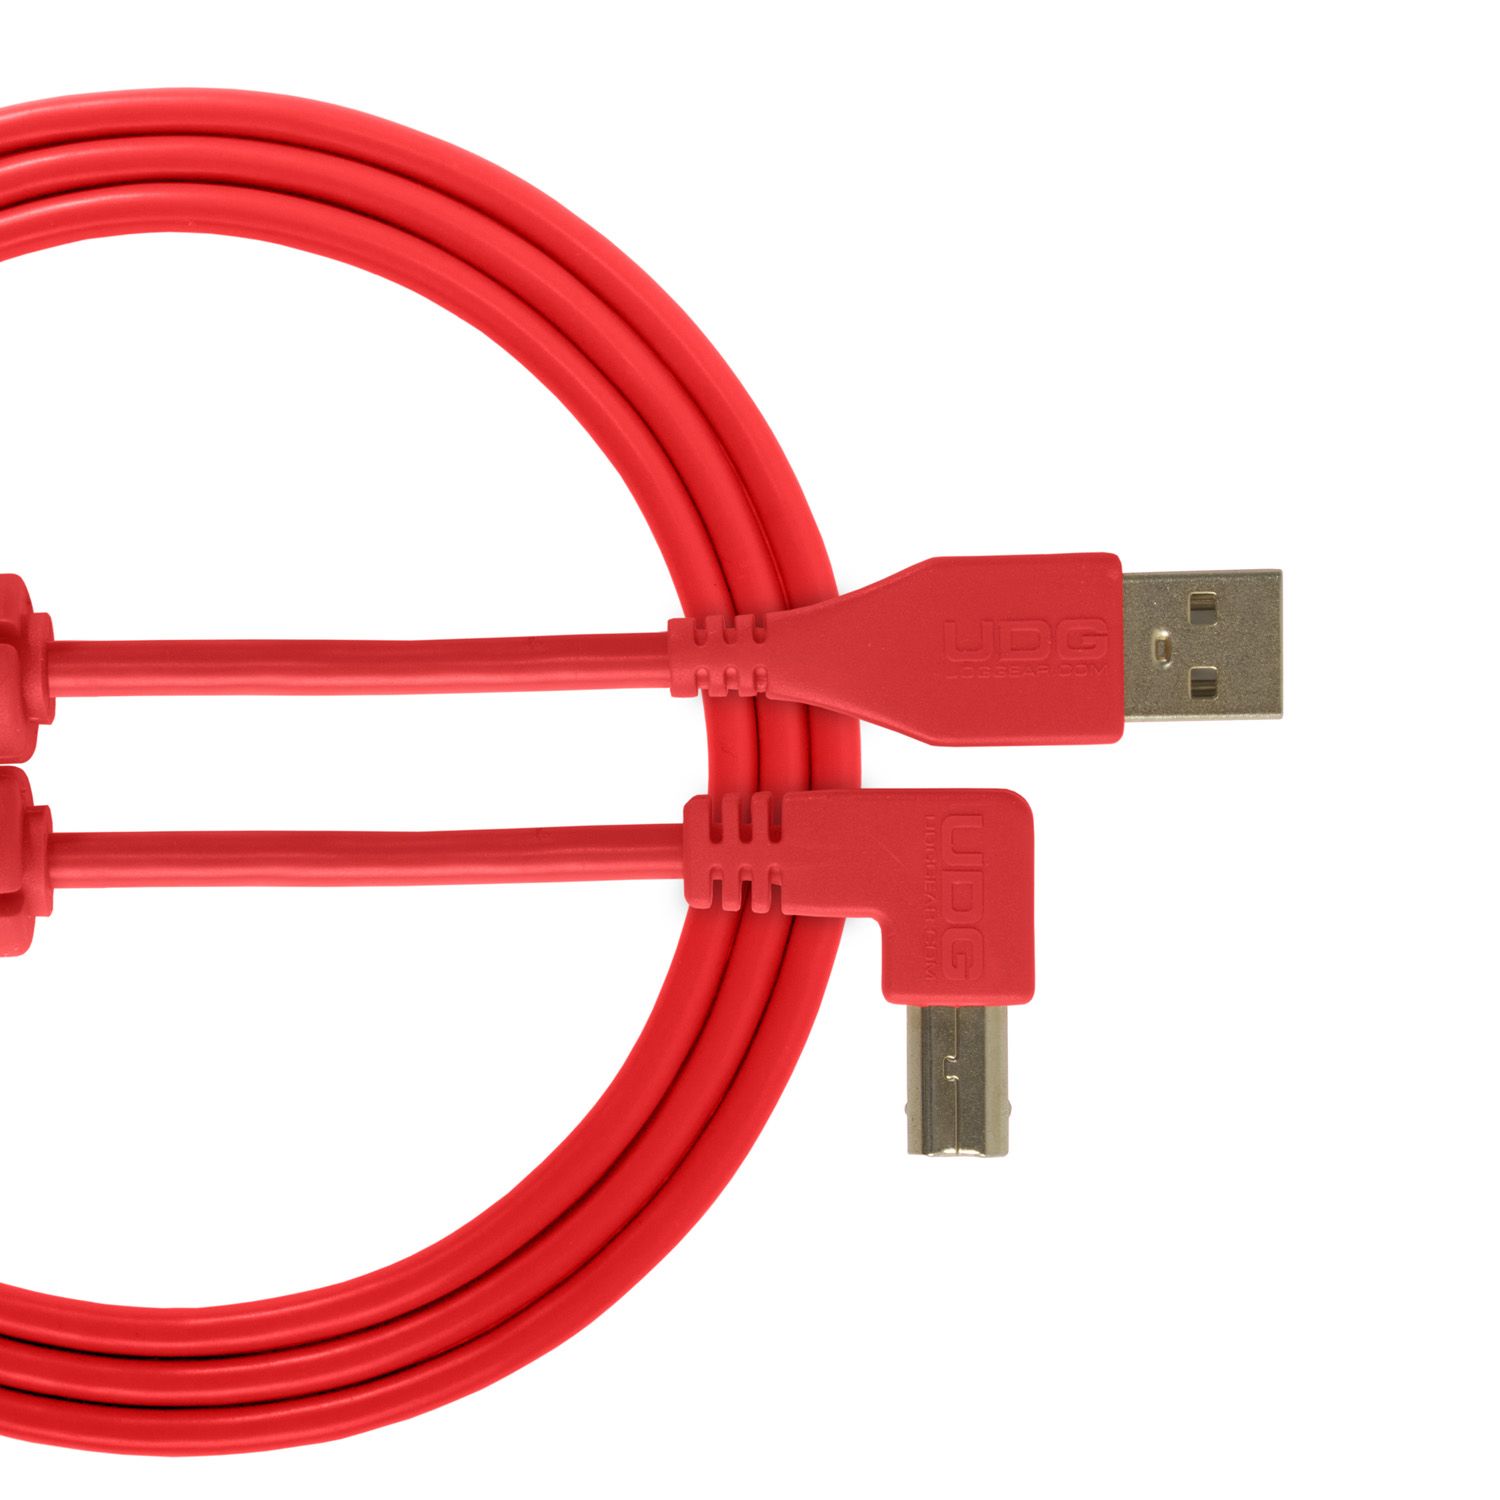 U95005RD UDG AUDIO CABLE USB 2.0 A-B RED ANGLED 2M